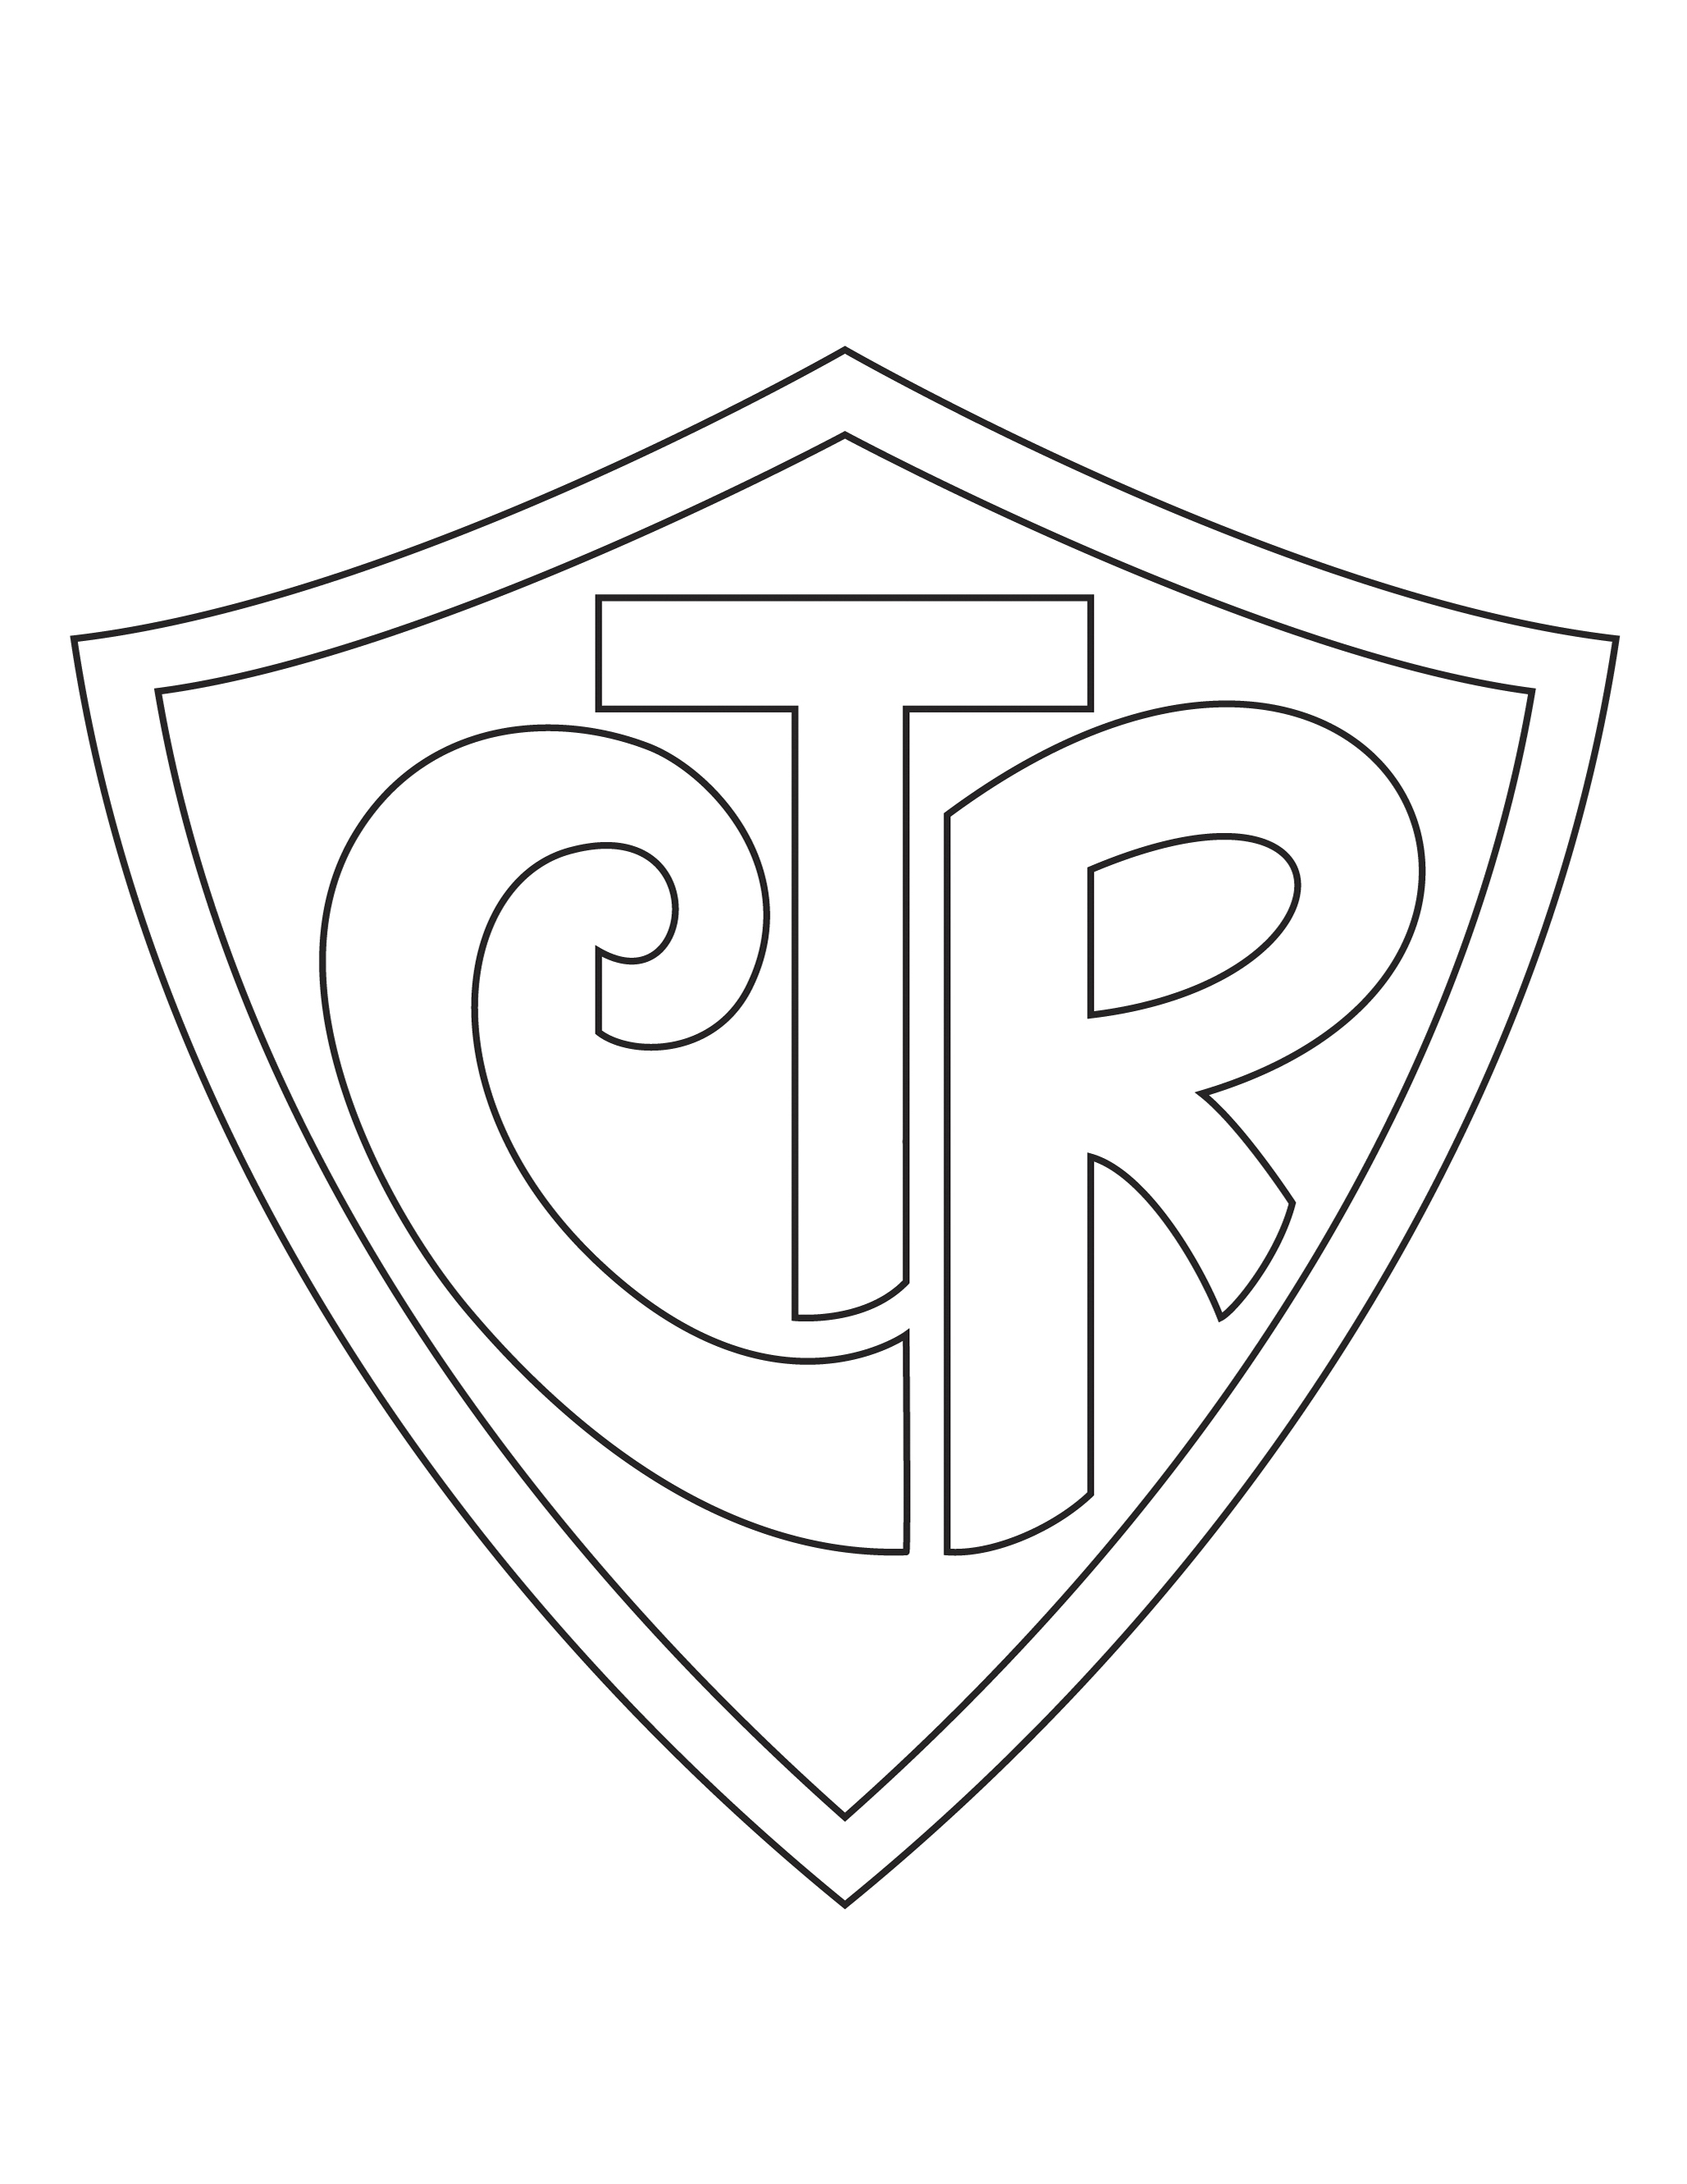 An illustration of the CTR symbol.